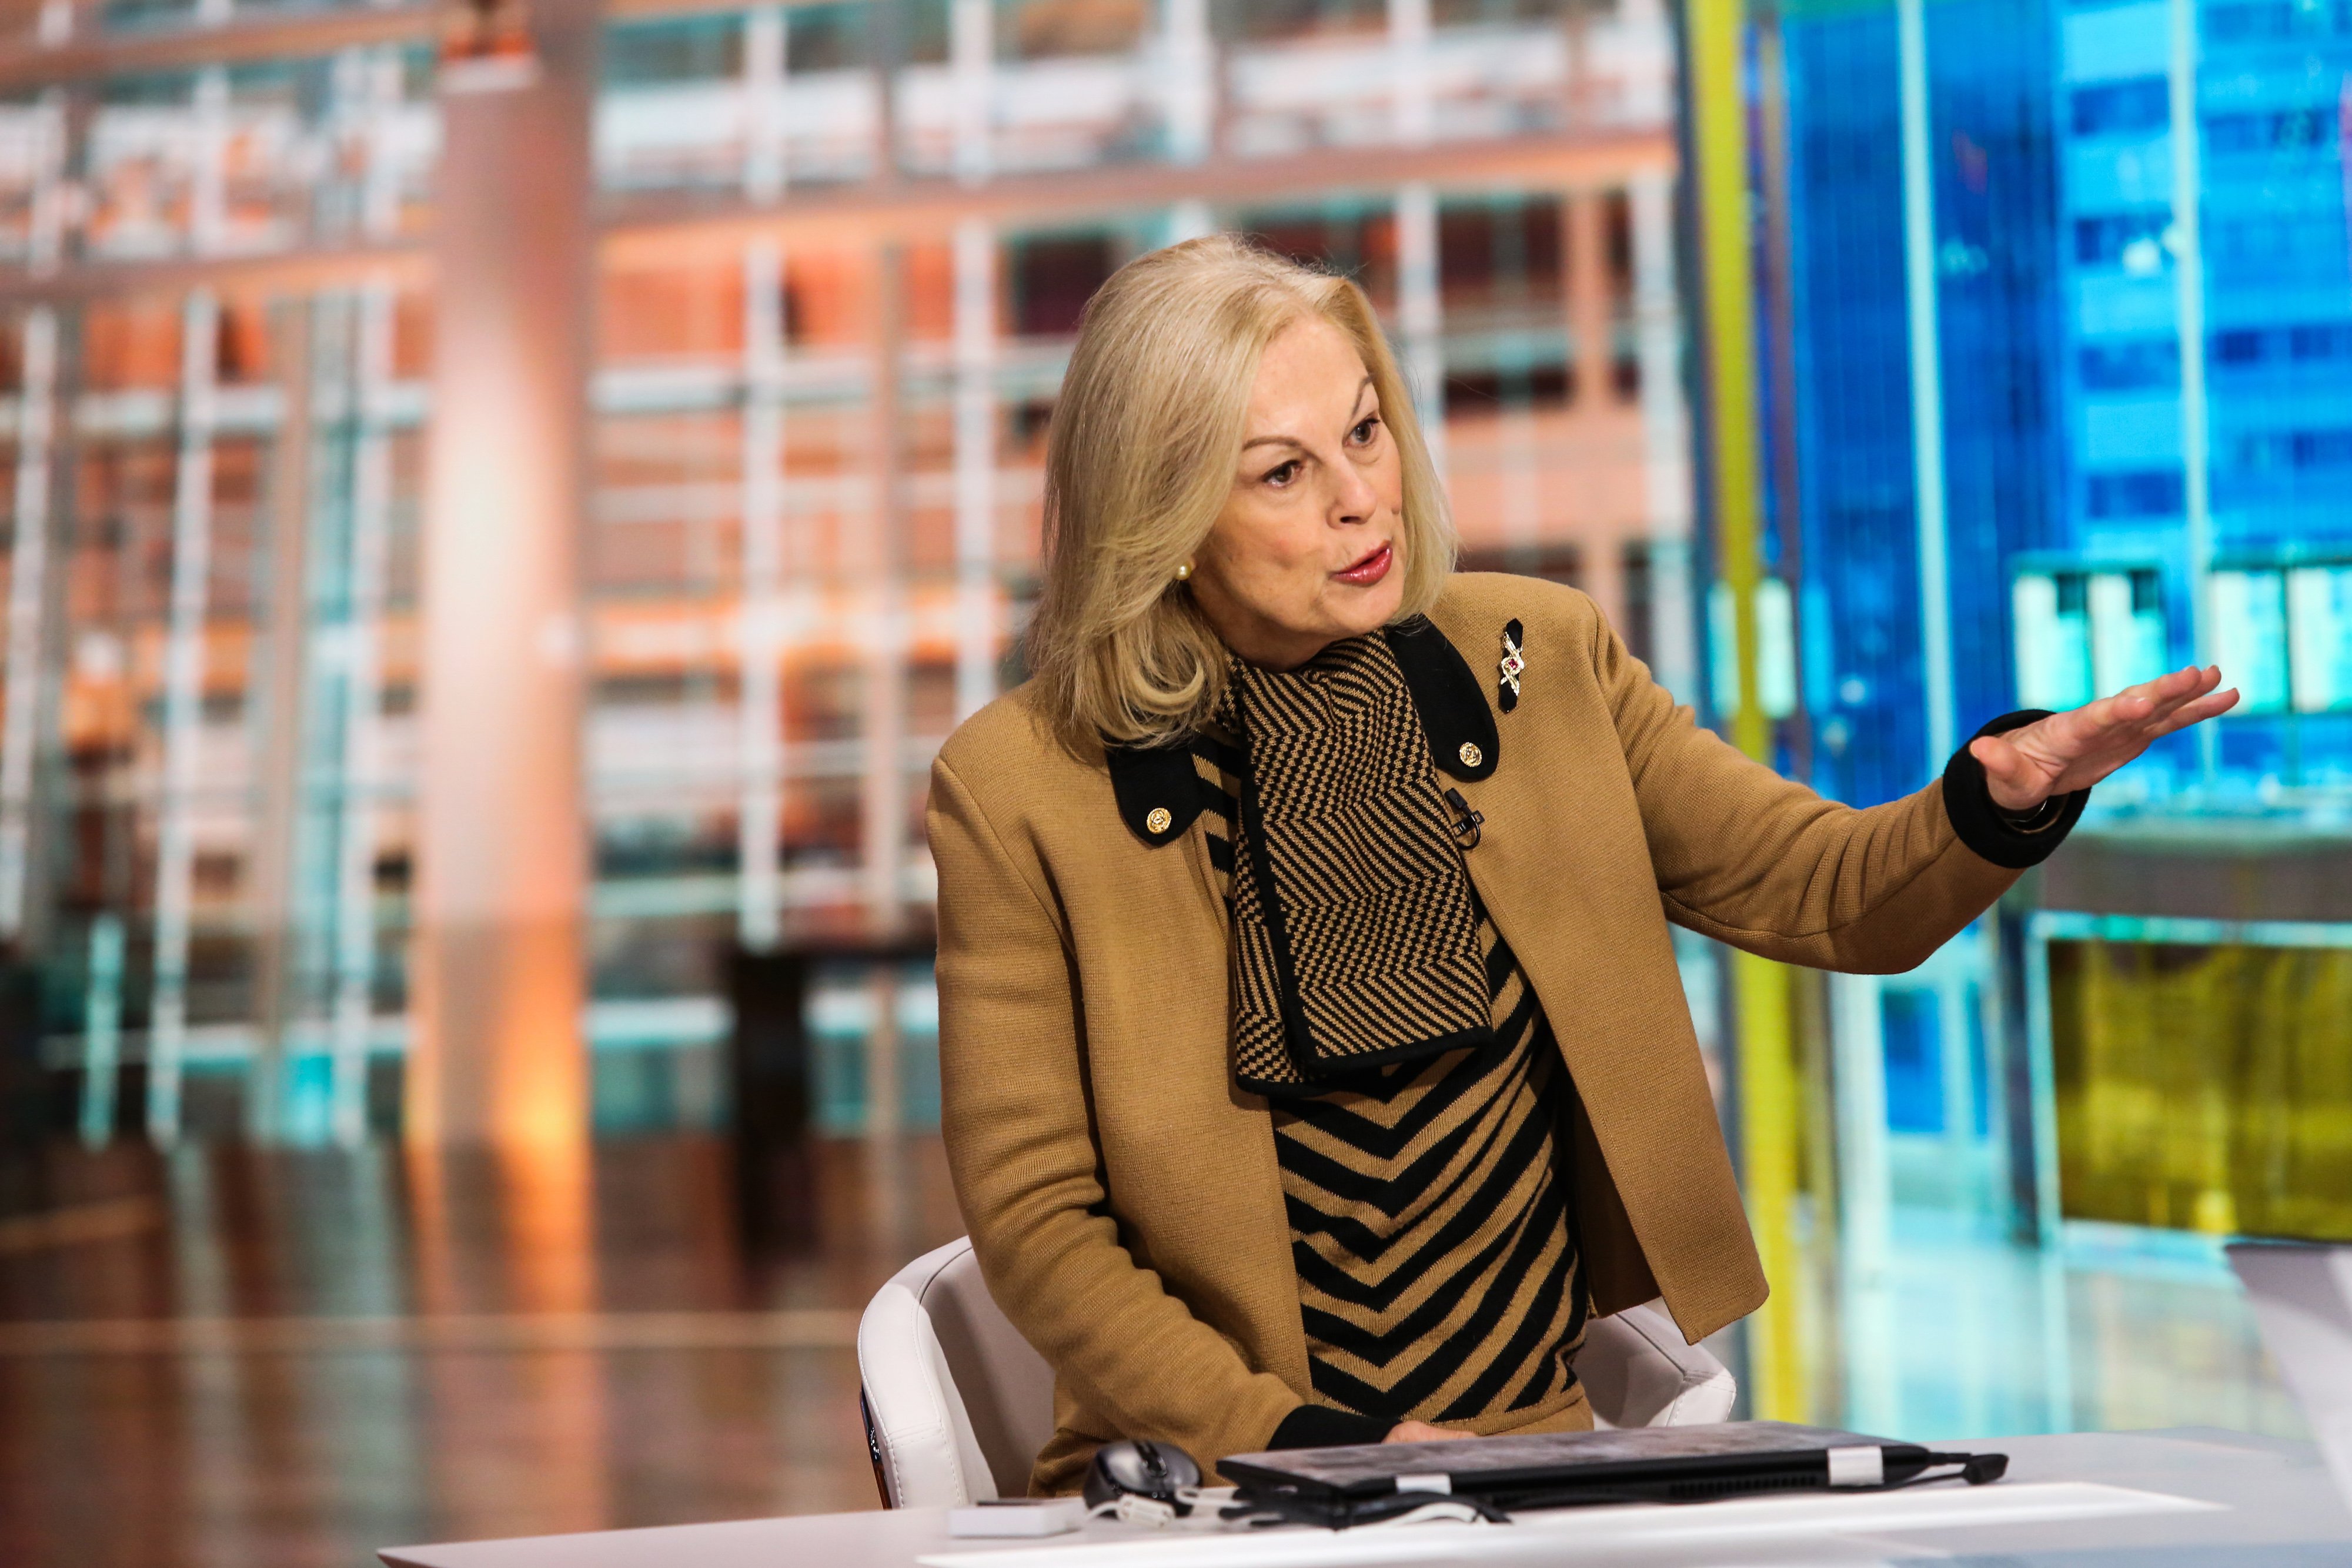 Christie Hefner is photographed as she speaks during a Bloomberg Television interview, on November 11, 2015, in New York City. | Source: Getty Images